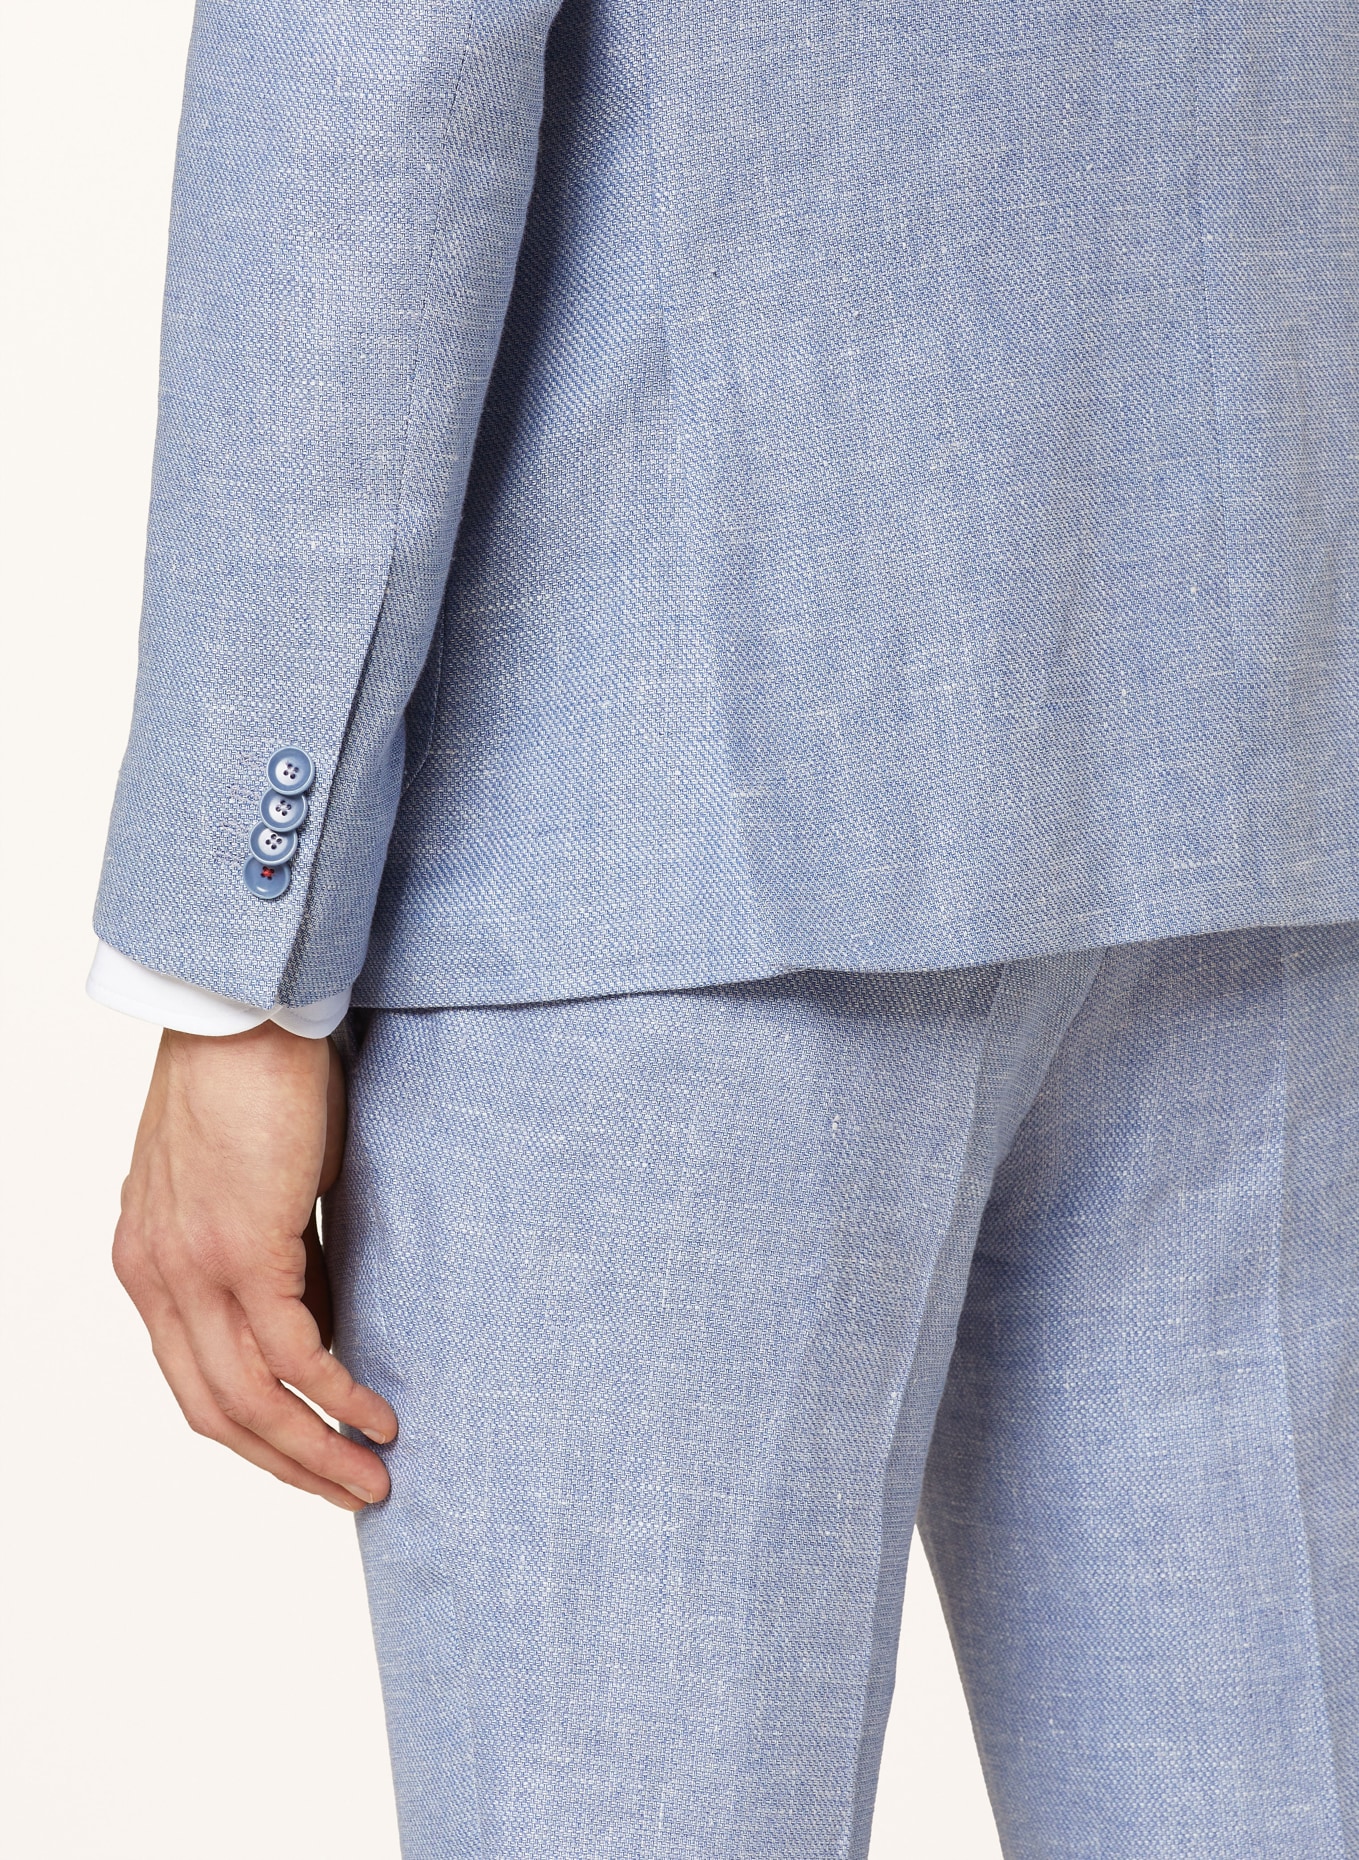 CG - CLUB of GENTS Suit jacket CG PERO slim fit with linen, Color: 61 BLAU HELL (Image 6)